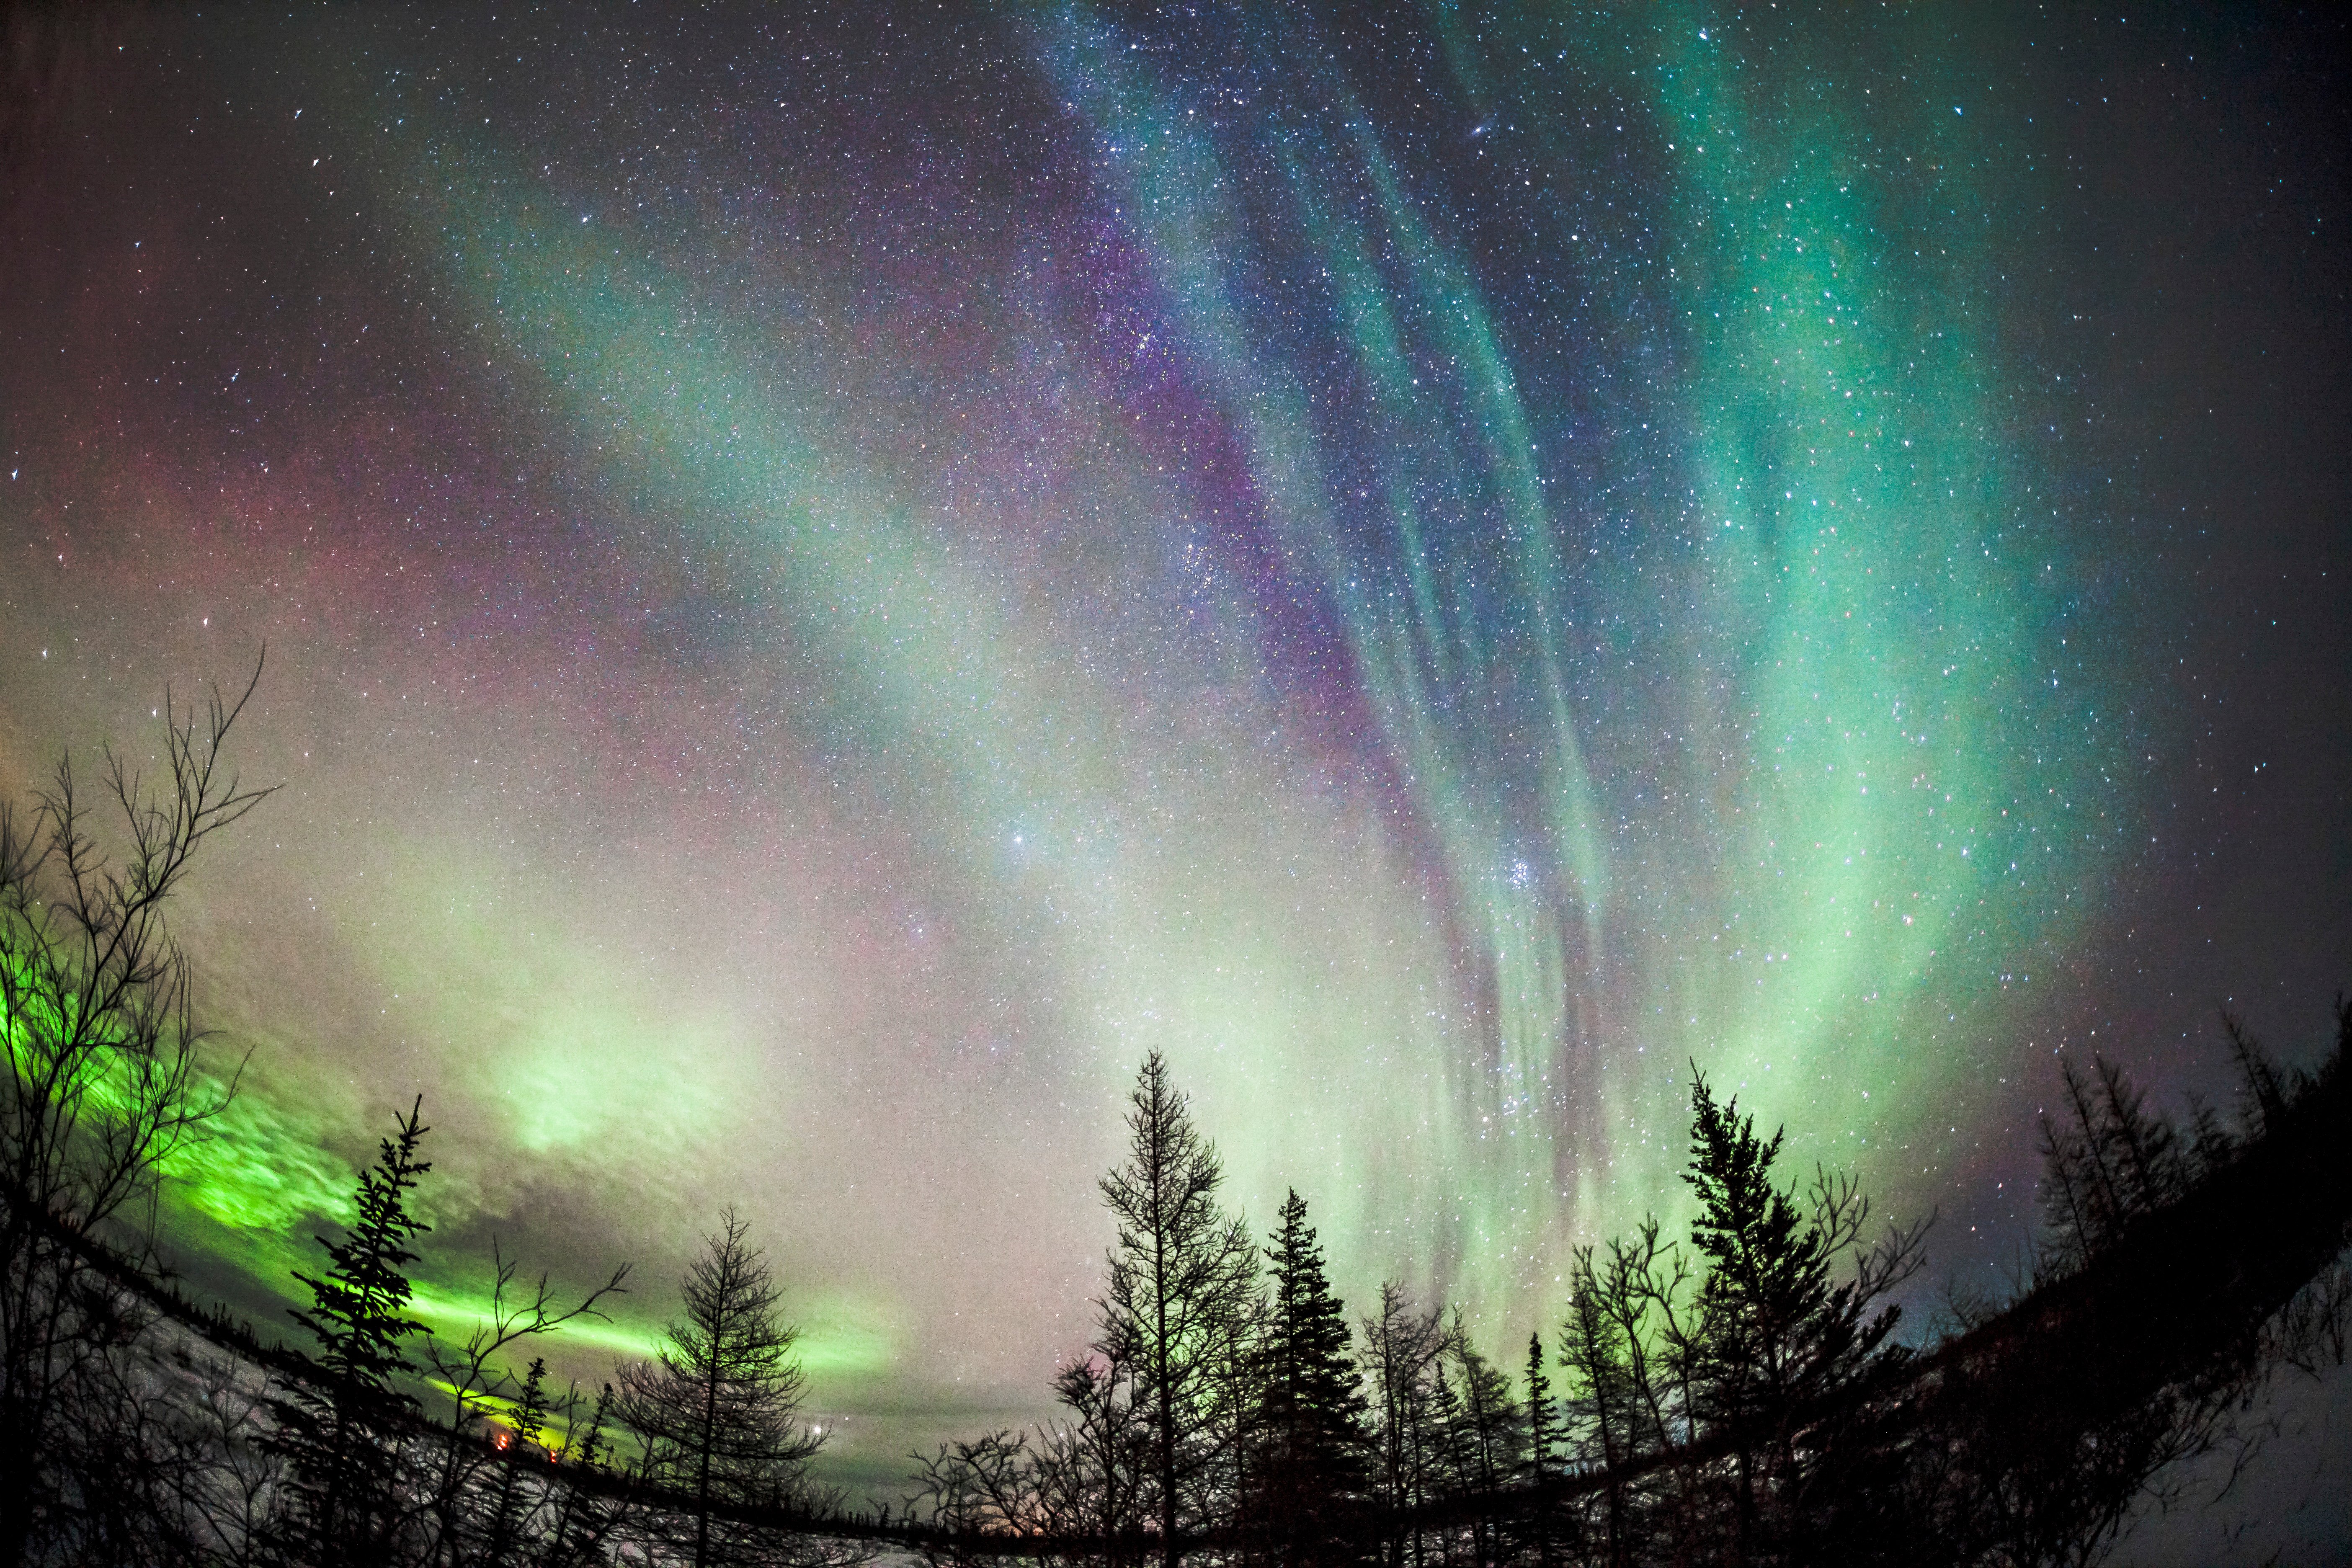 Northern lights dancing overhead in Churchill, Manitoba. Photo by Simon Gee.